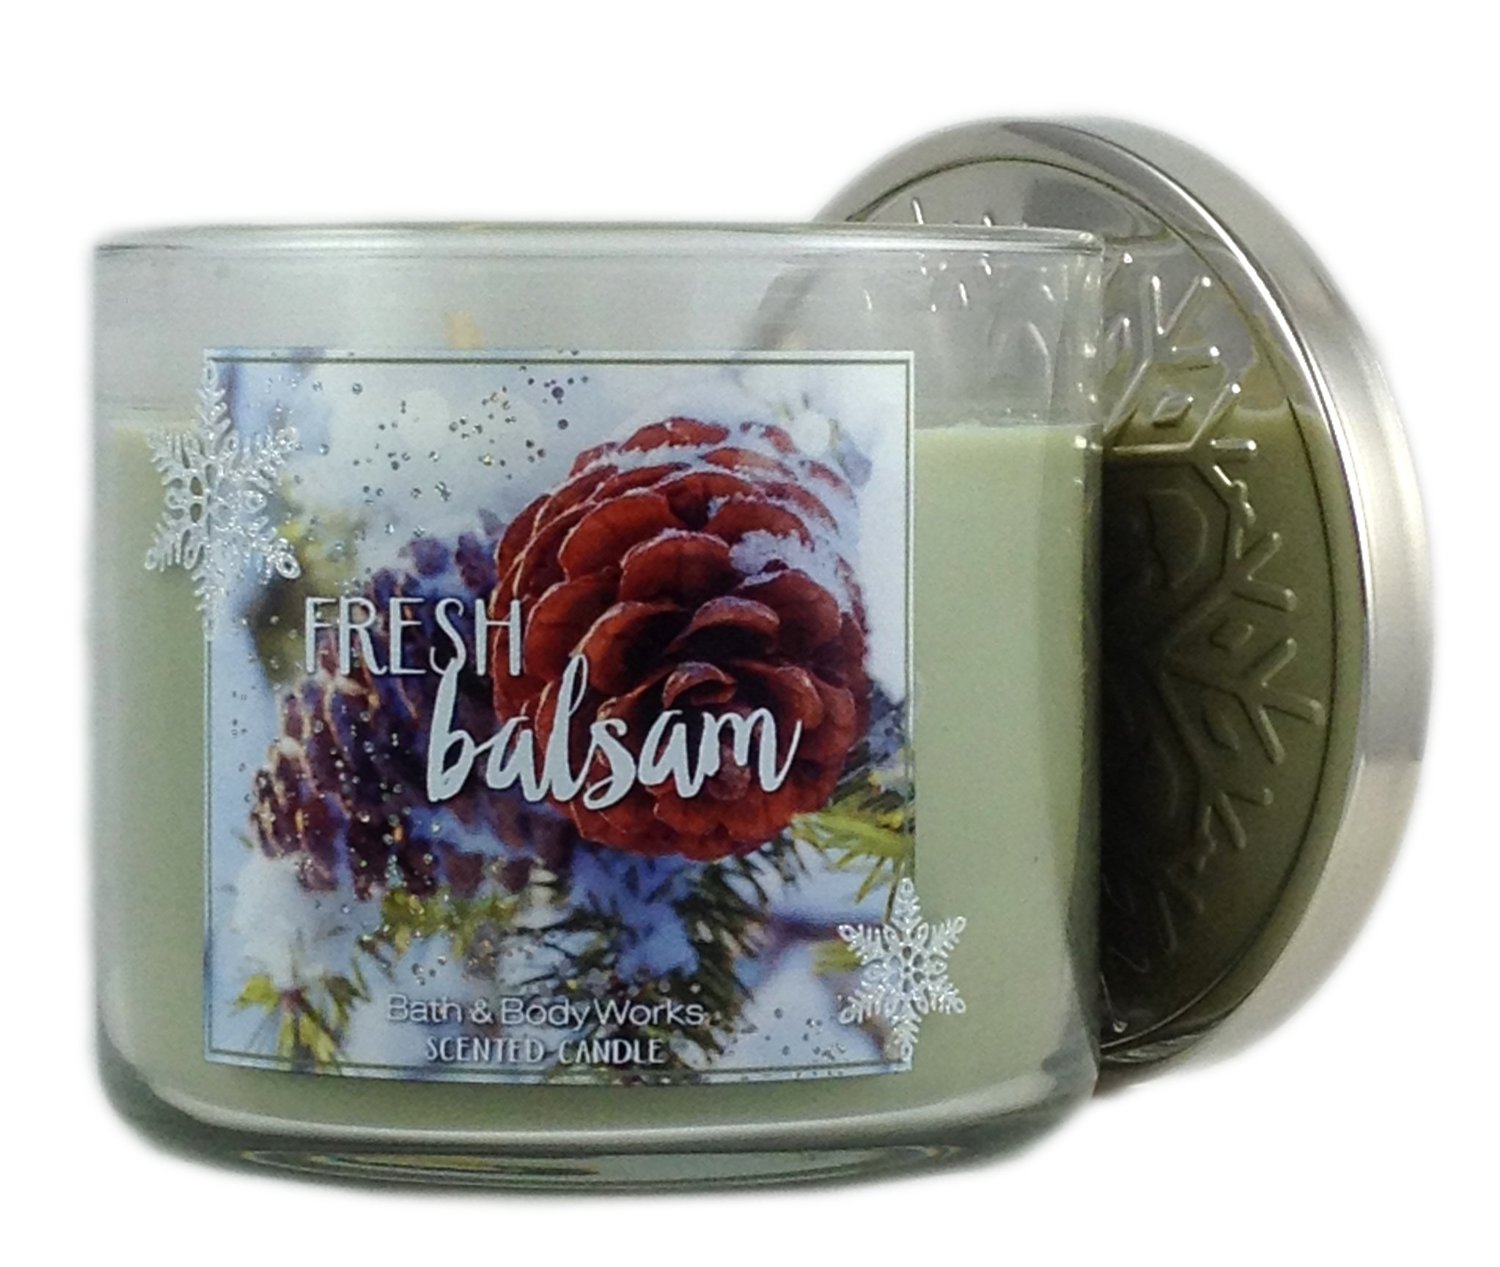 Bath and Body Works Fresh Balsam 3-wick candle